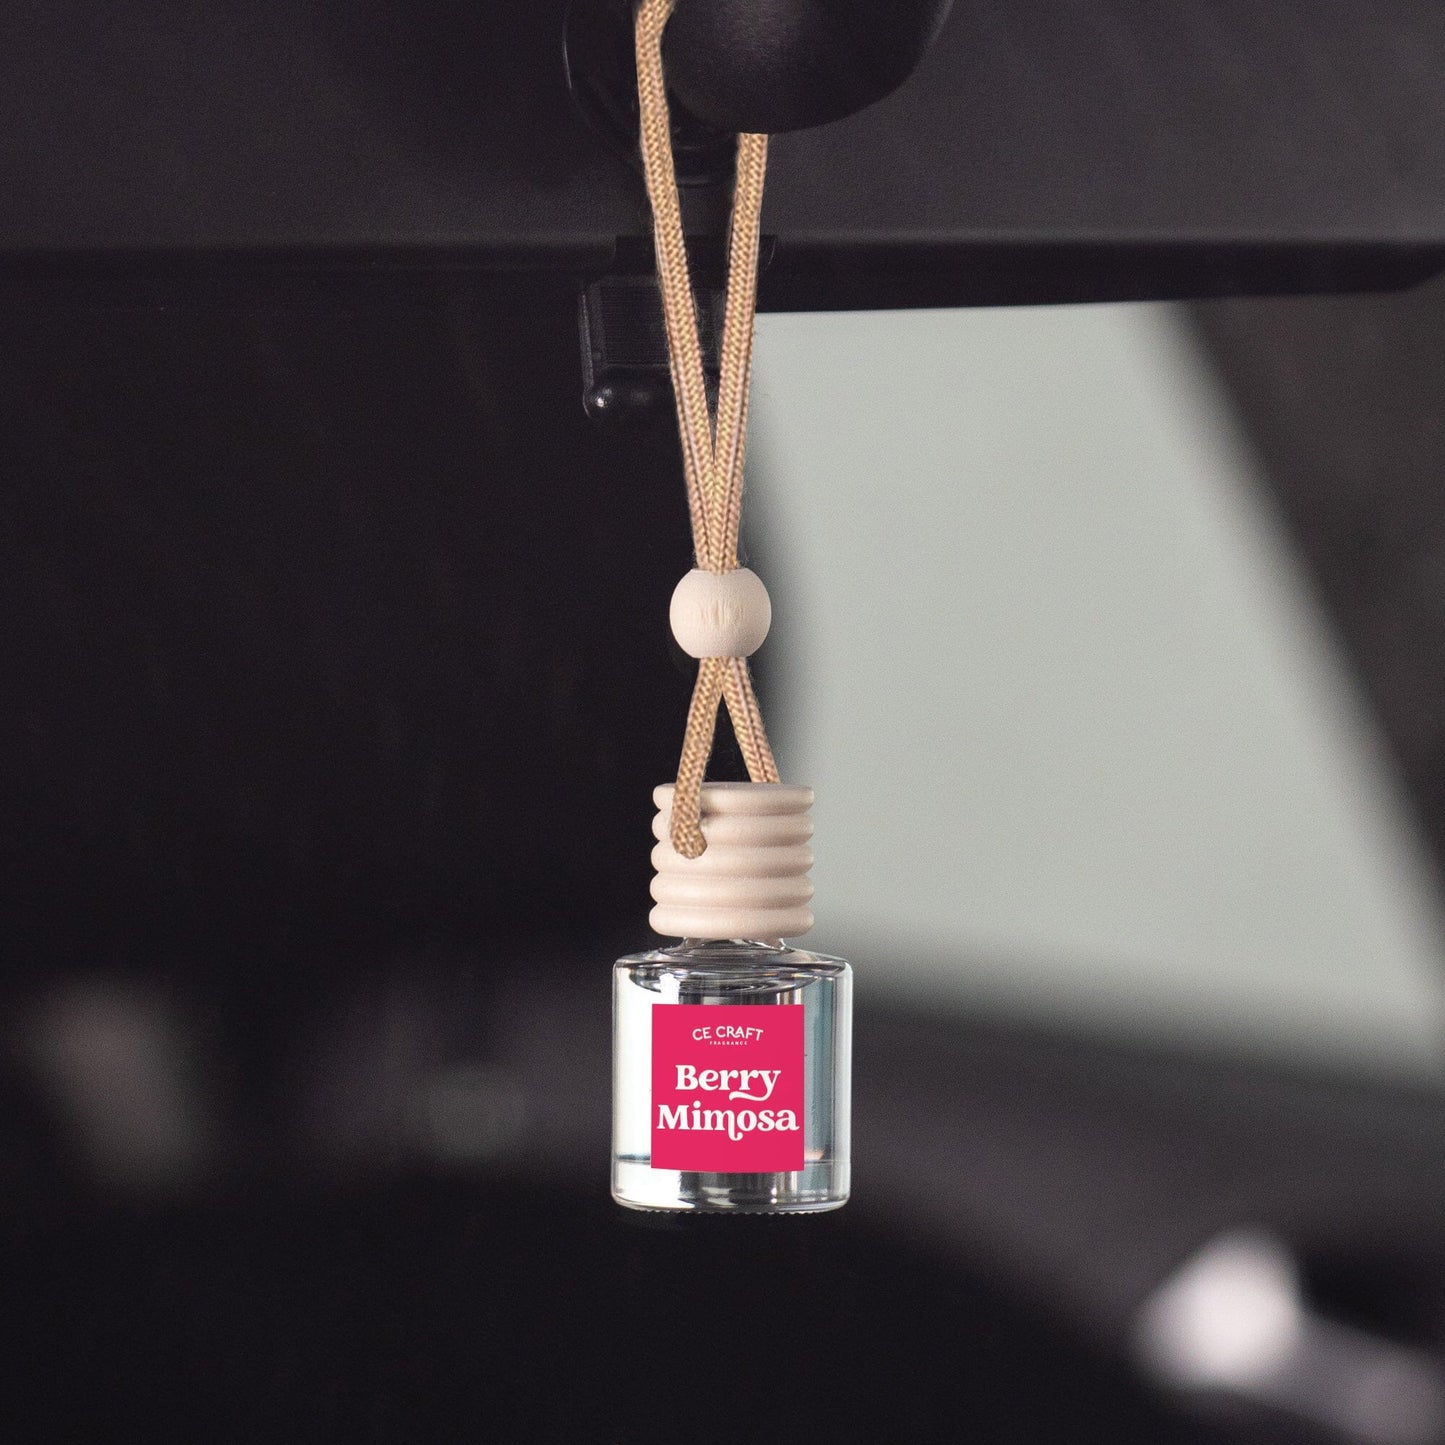 Scented Car Freshener - Car Air Freshener Diffuser - Last 60+ Days Vehicle Air Fresheners CE Craft Berry Mimosa 